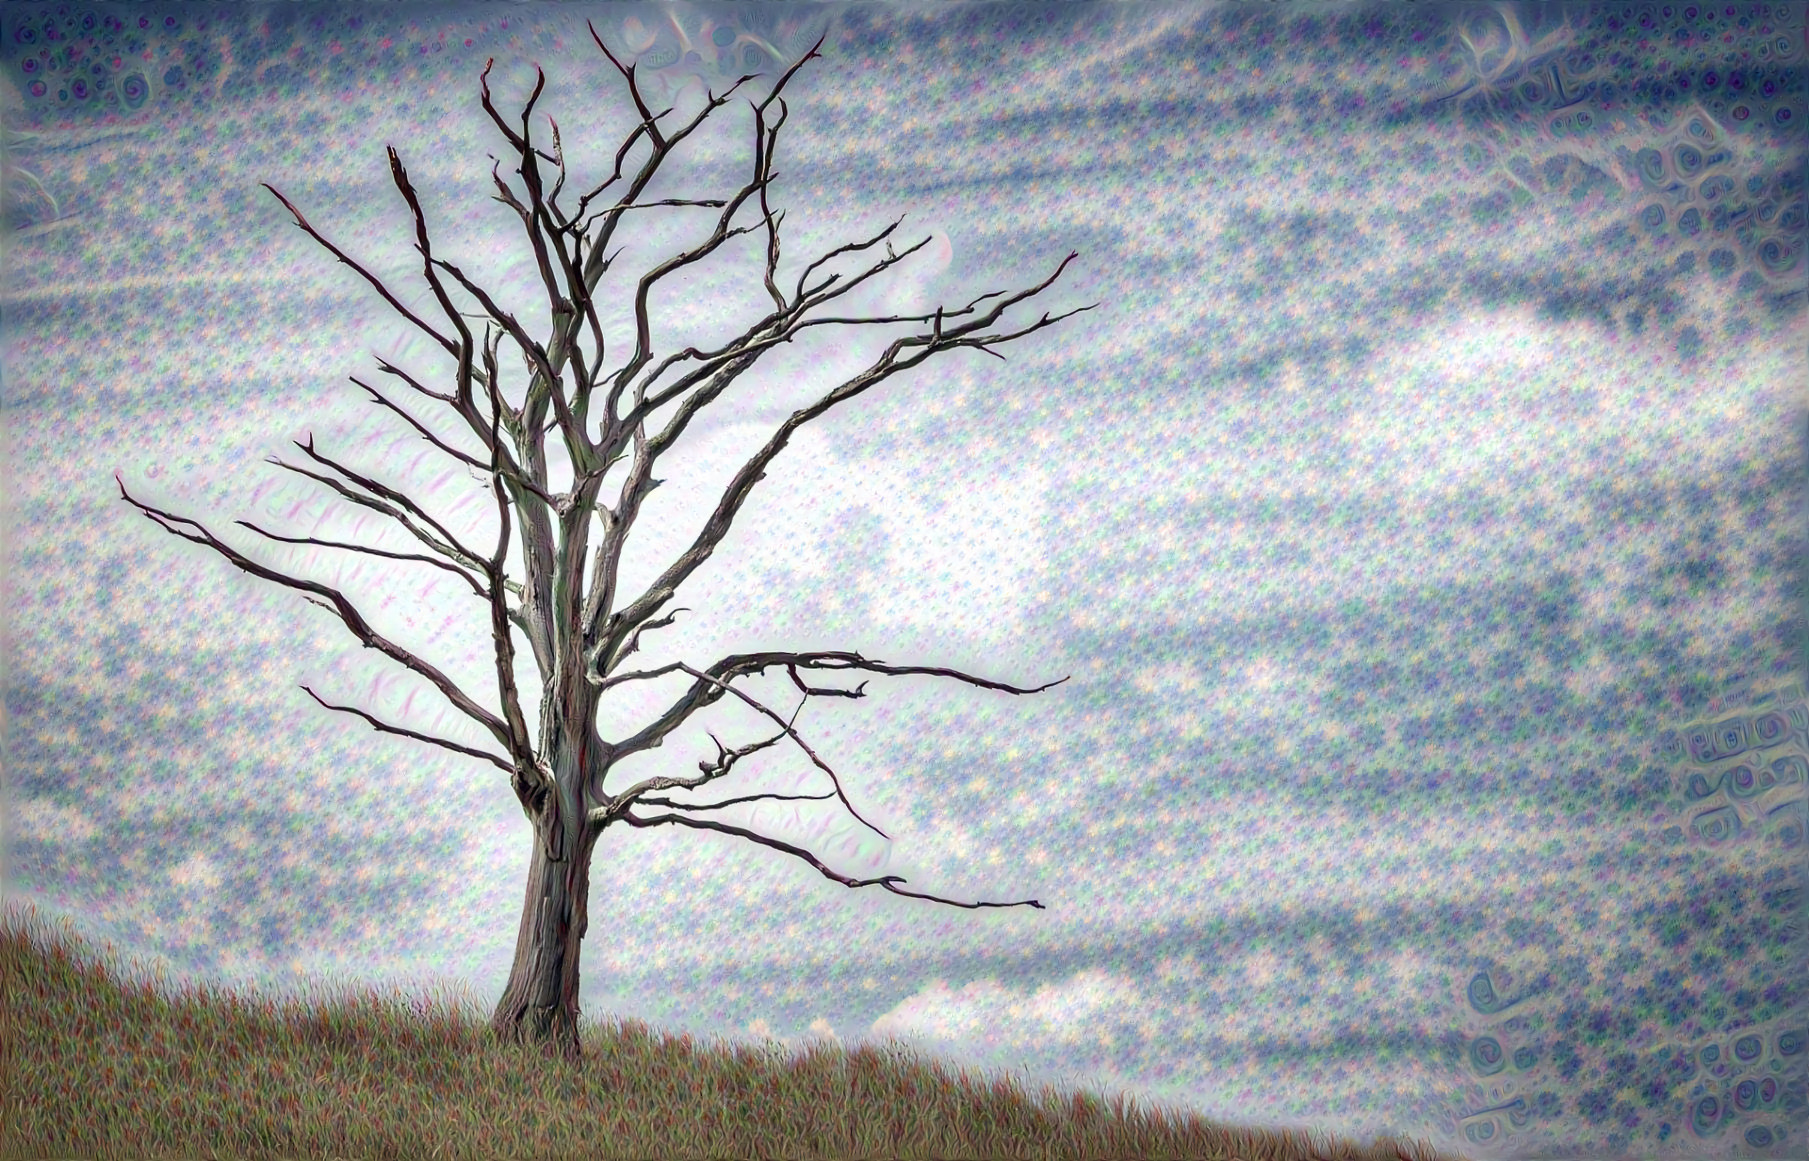 Tree on a Hill